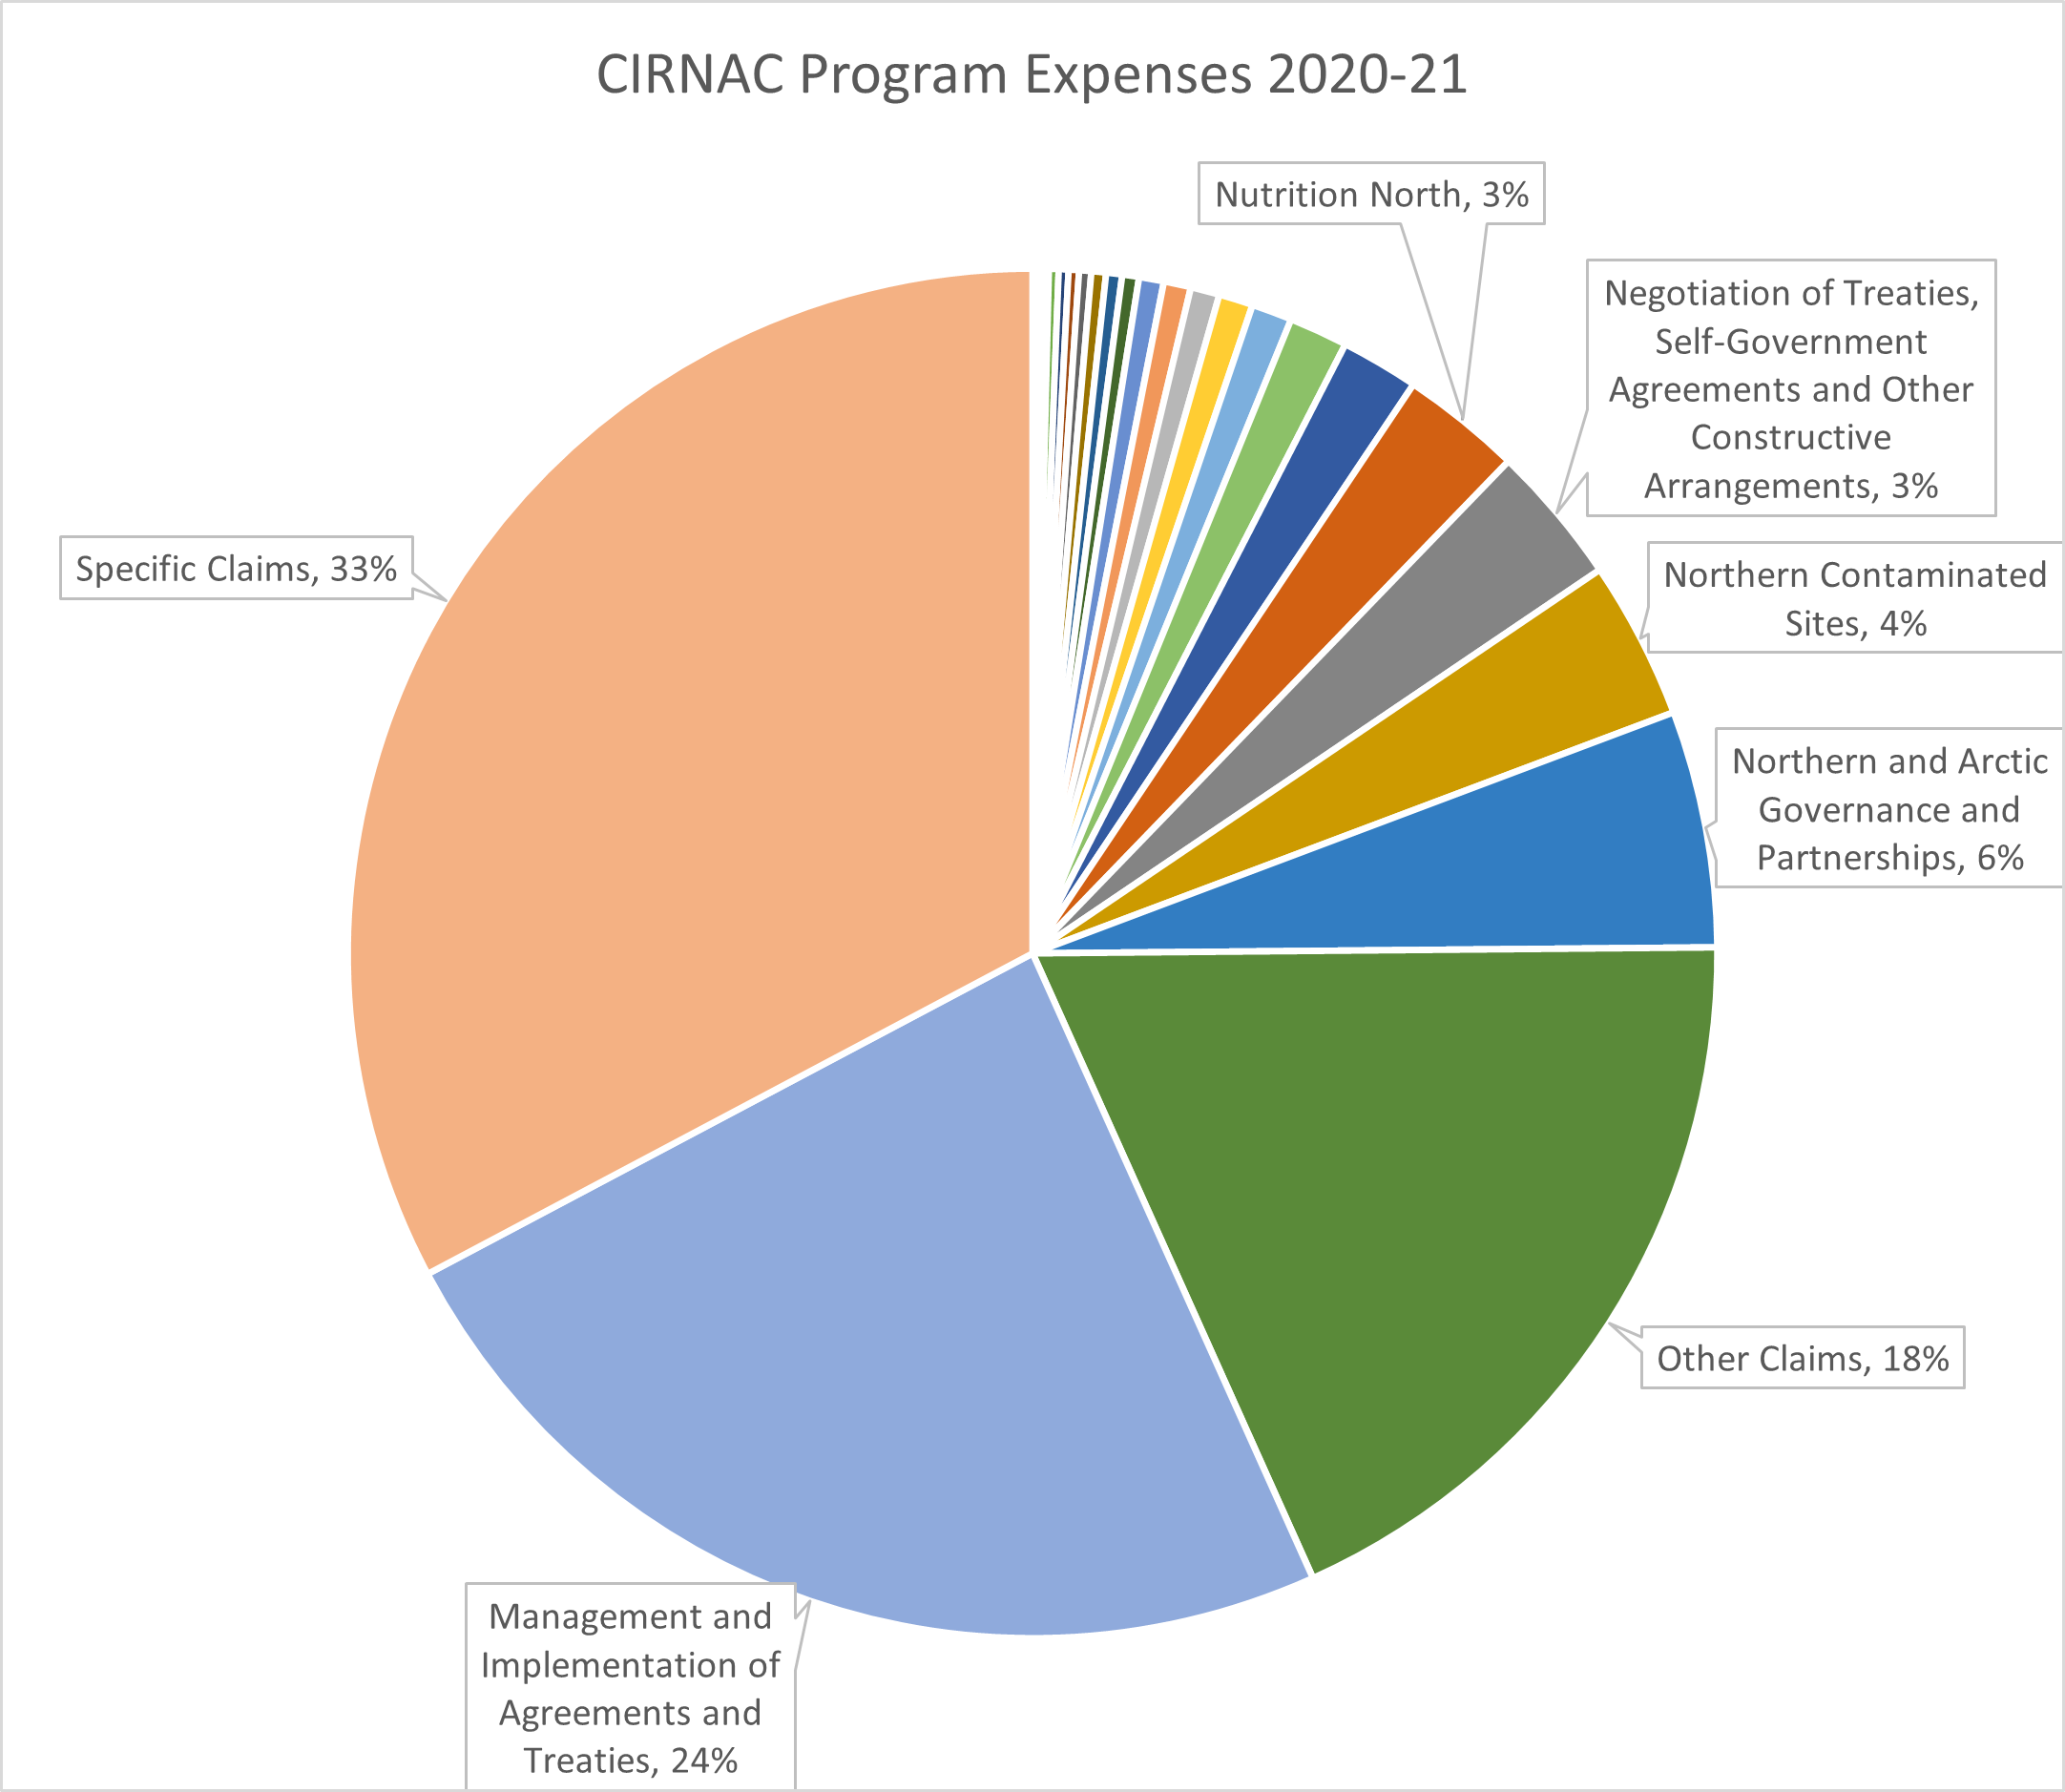 In this pie chart, Specific Claims spending is 33% of total spending, Management and Implementation of Agreements and Treaties is 24%, and Other Claims is 18%. The other 25% of total CIRNAC spending is divided among more than eighteen other categories, including Nutrition North at 3%.